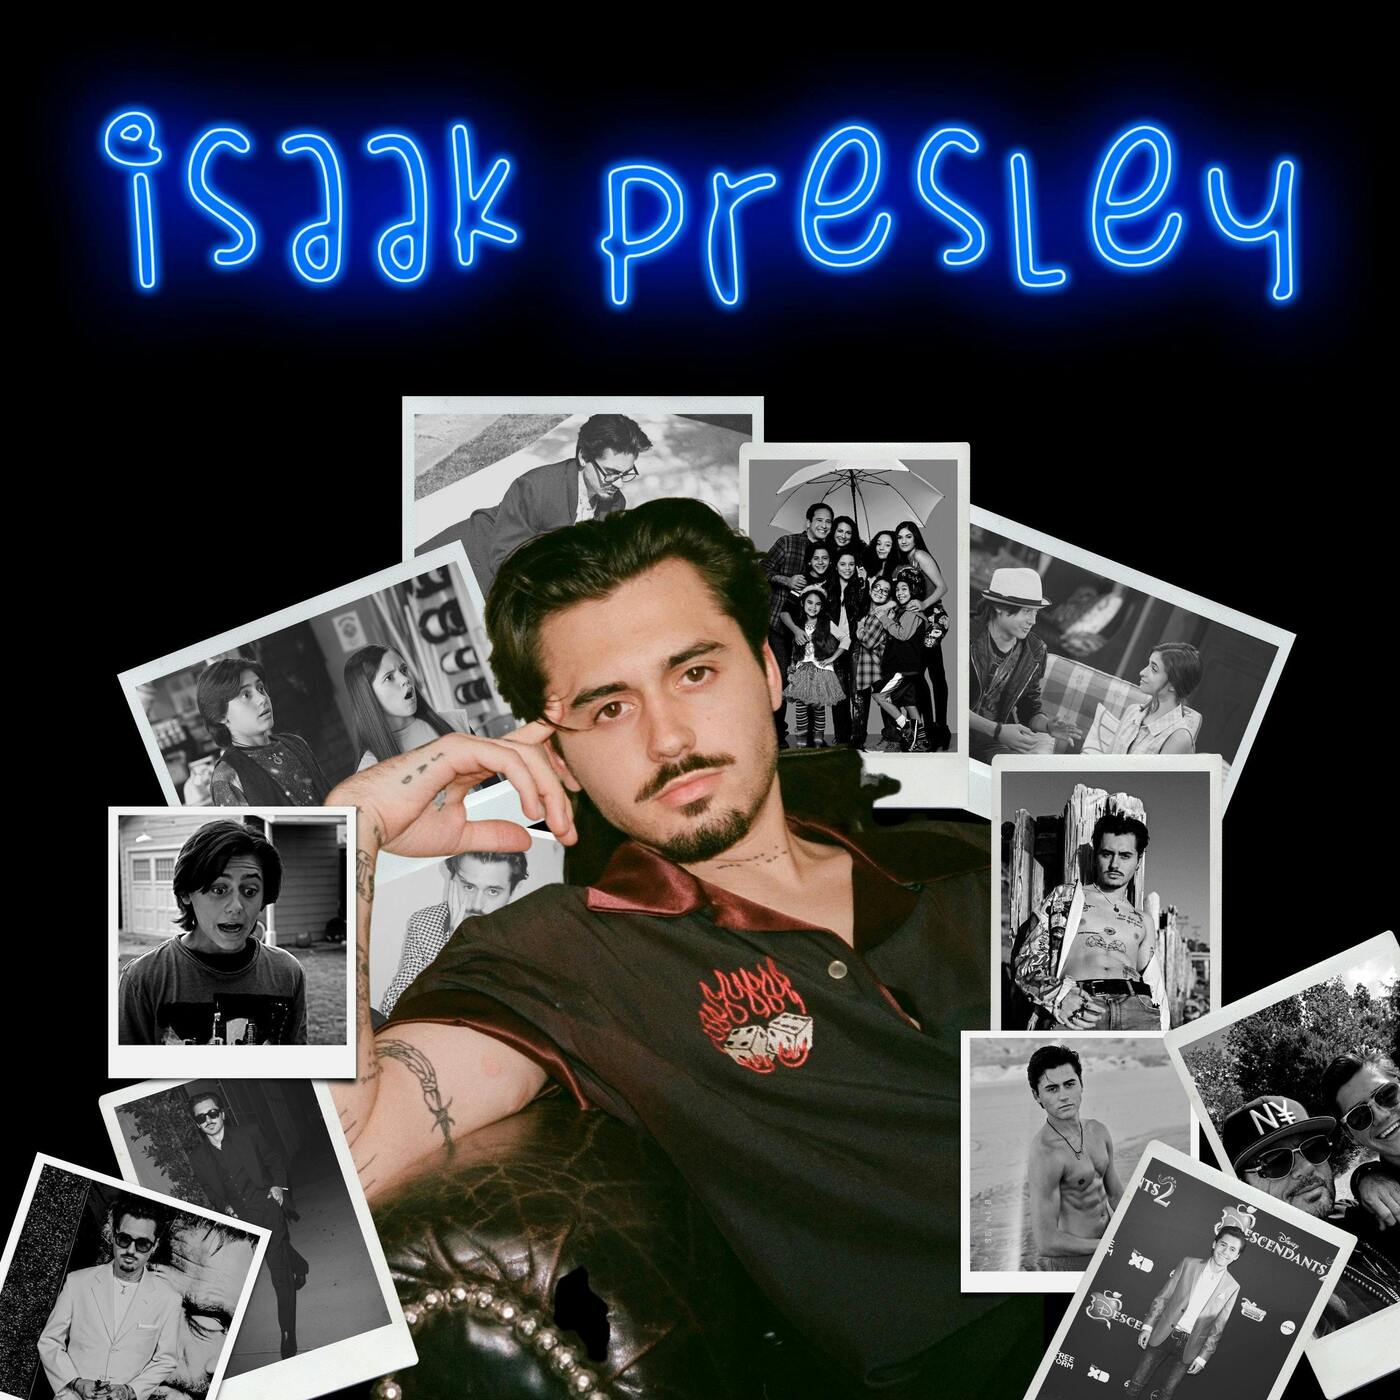 Vulnerable EP73: Disney Star Isaak Presley on Death, Jail, and Addiction